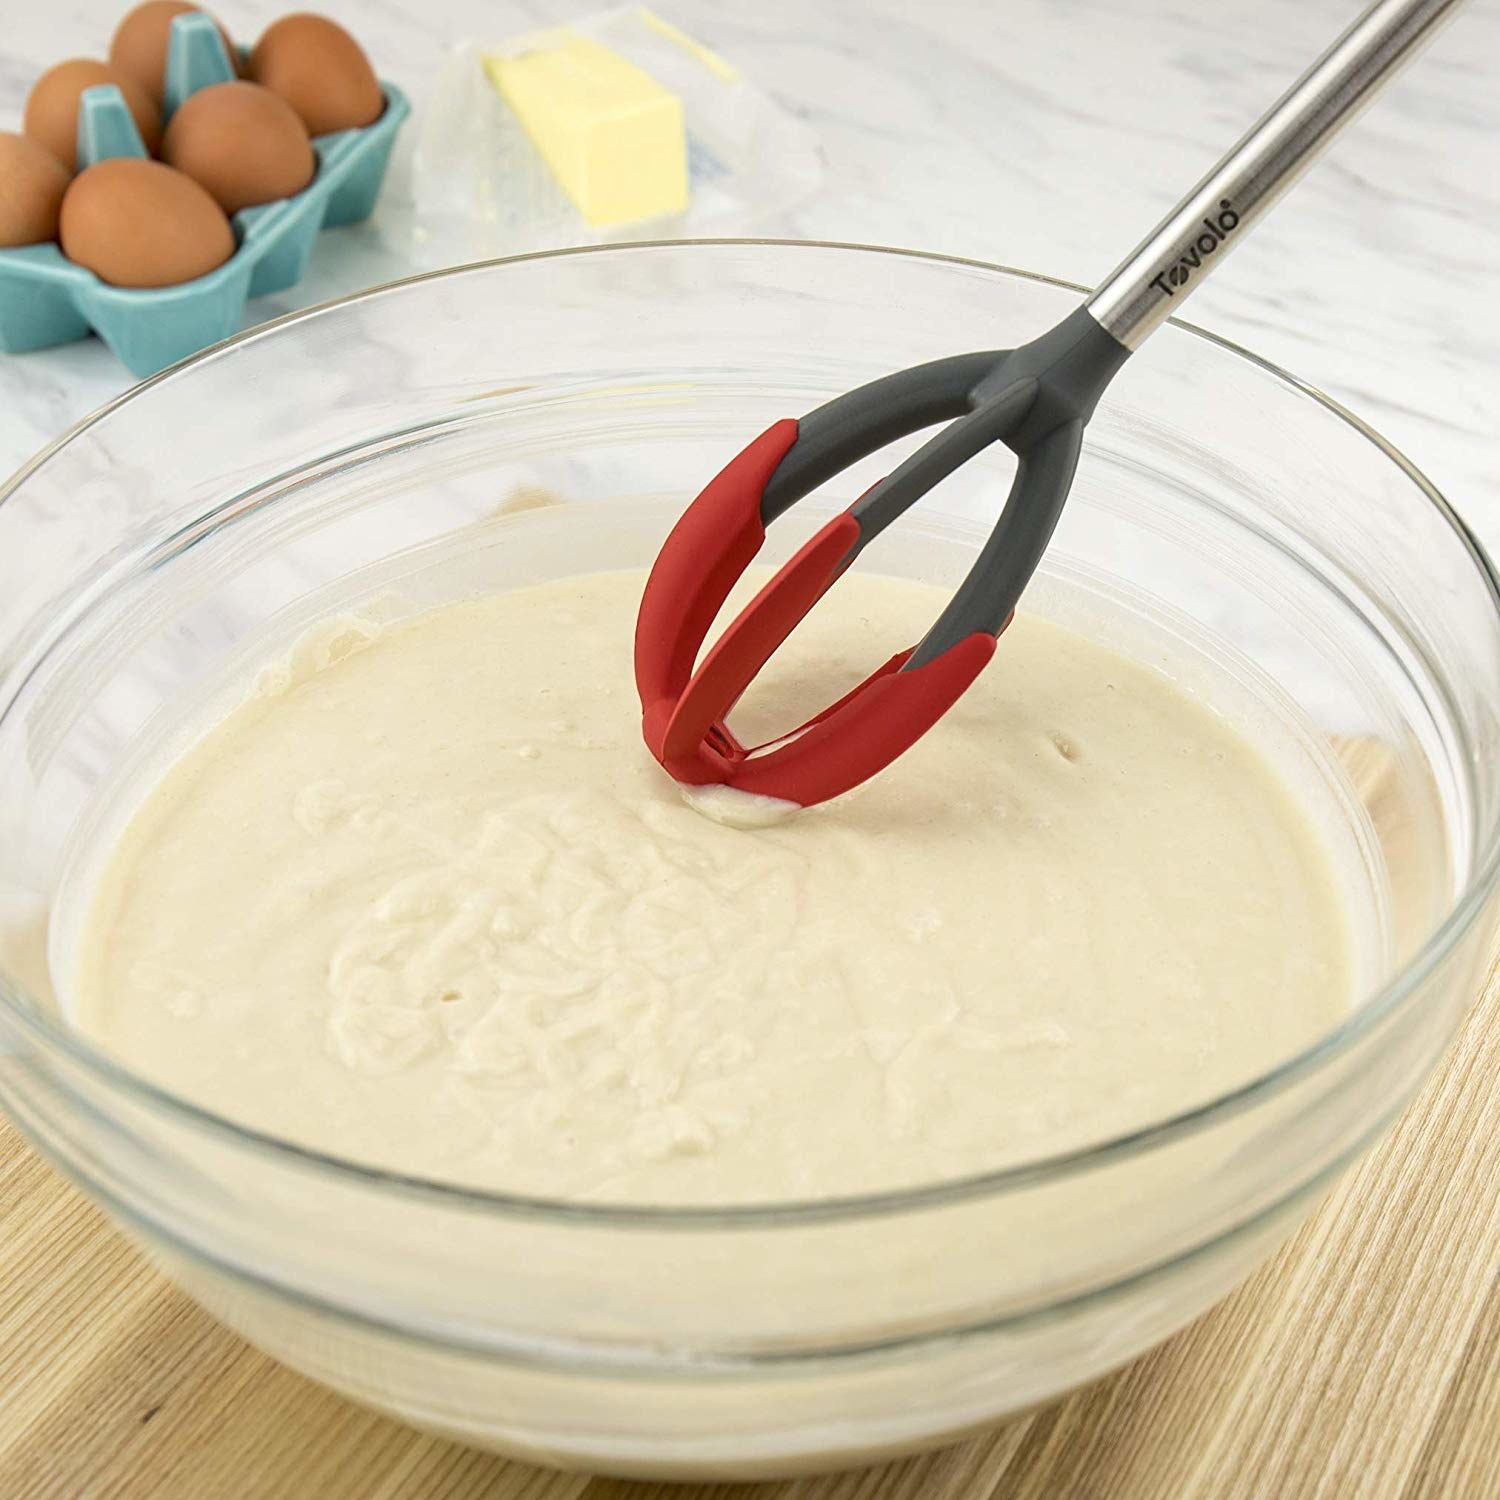 the whisk being used in a bowl of batter